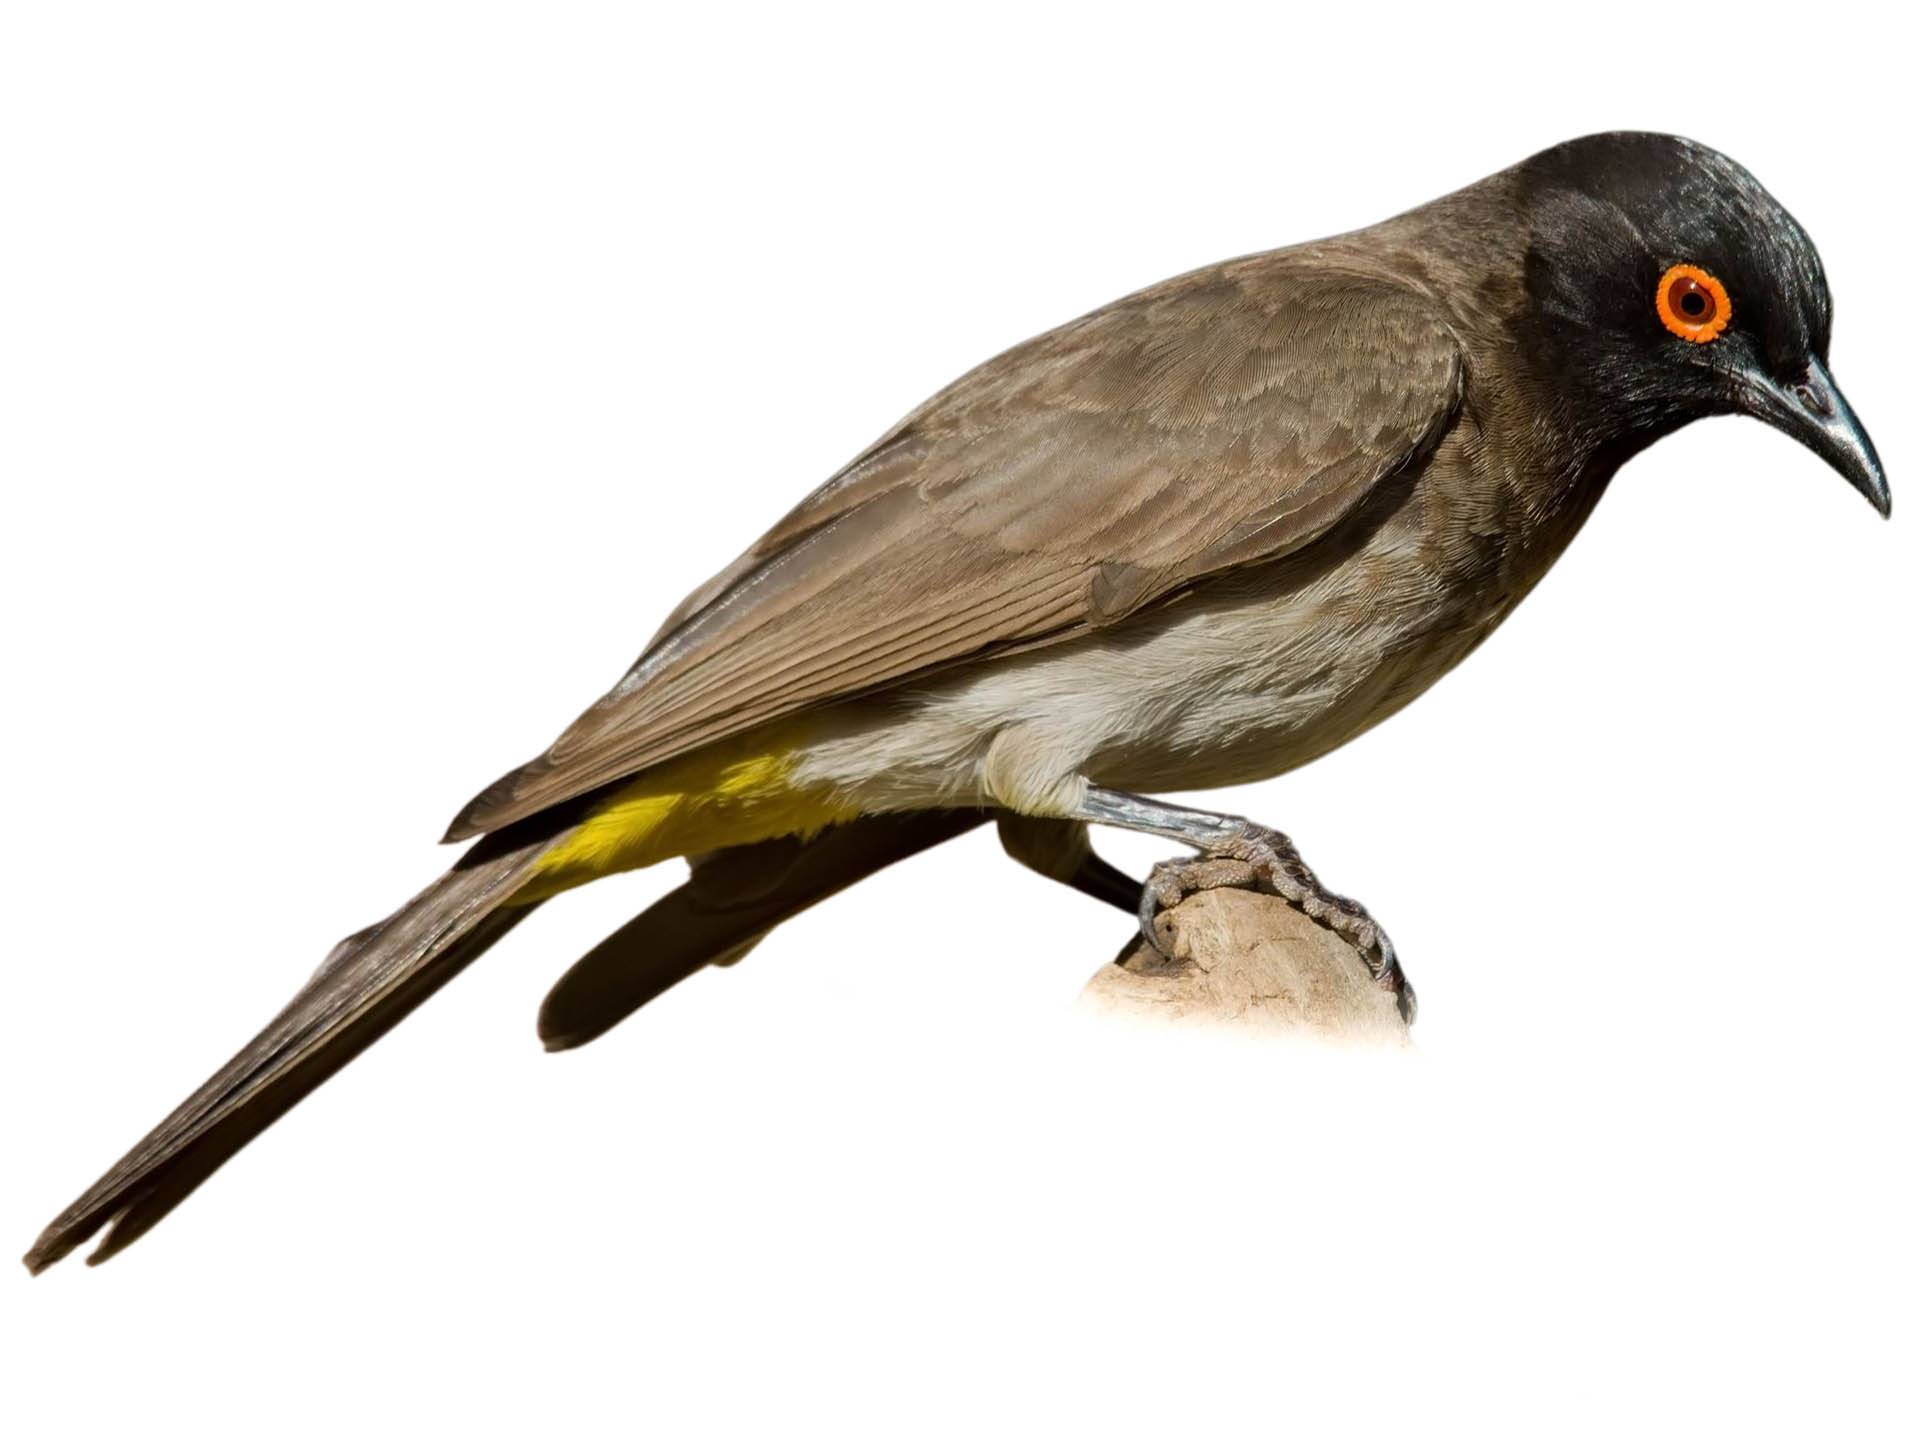 A photo of a African Red-eyed Bulbul (Pycnonotus nigricans)